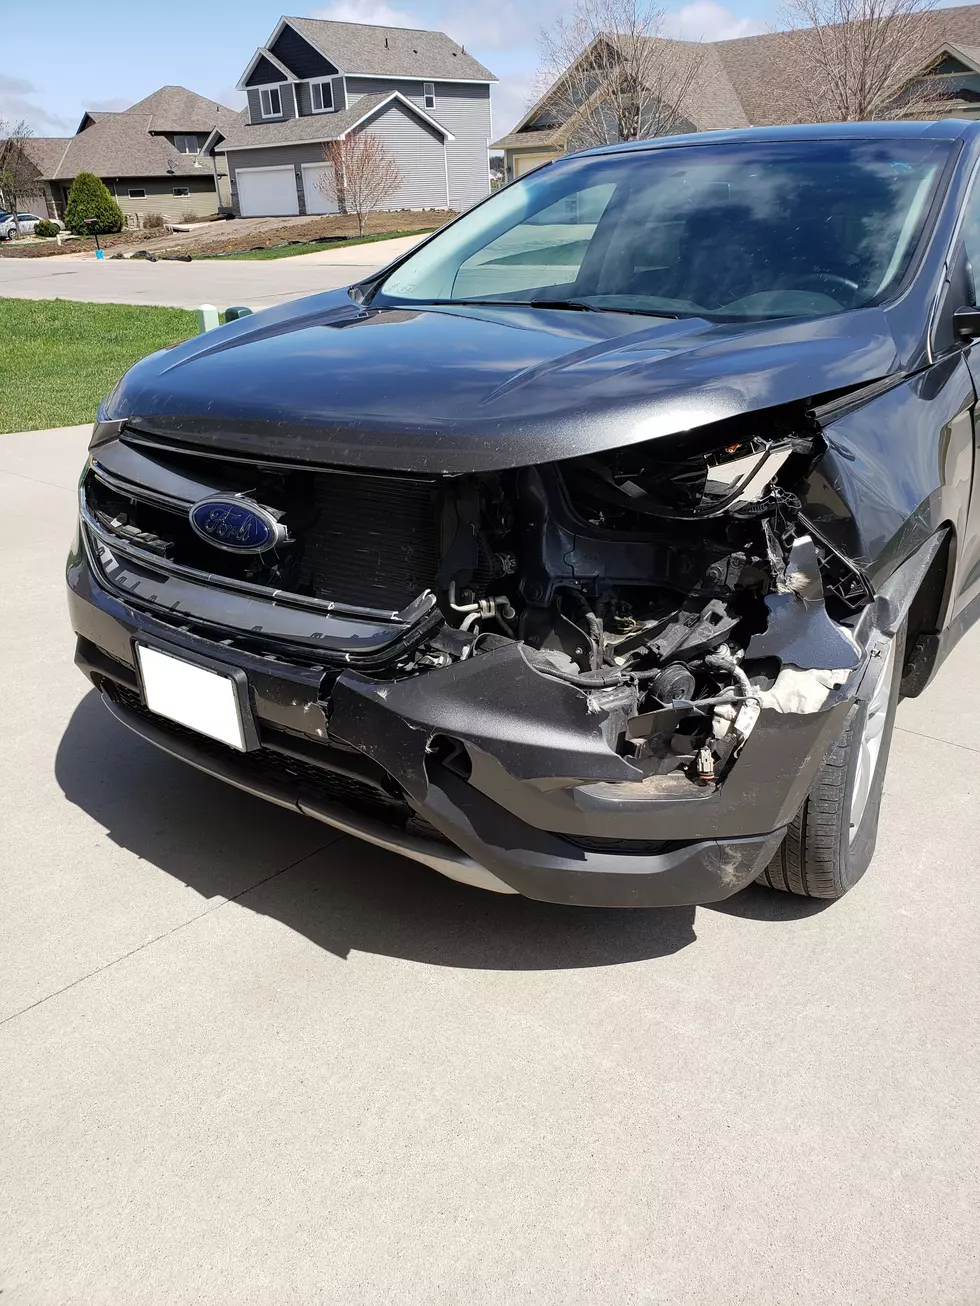 The Buck Stopped Here&#8230;How Much A Car Deer Collision Can Cost